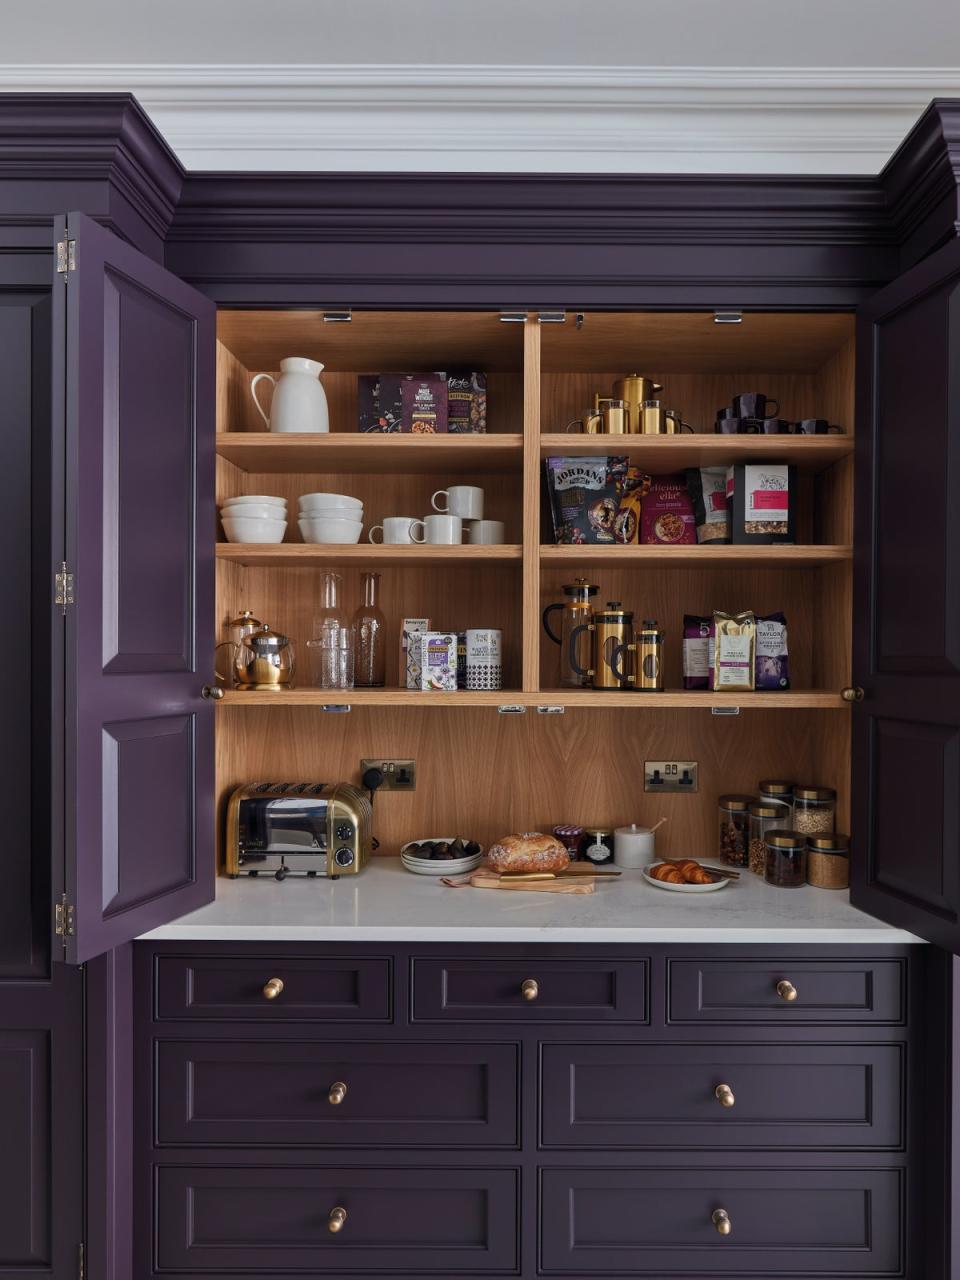 Bar carts, be gone! It’s all about the pantry (Tom Howley)